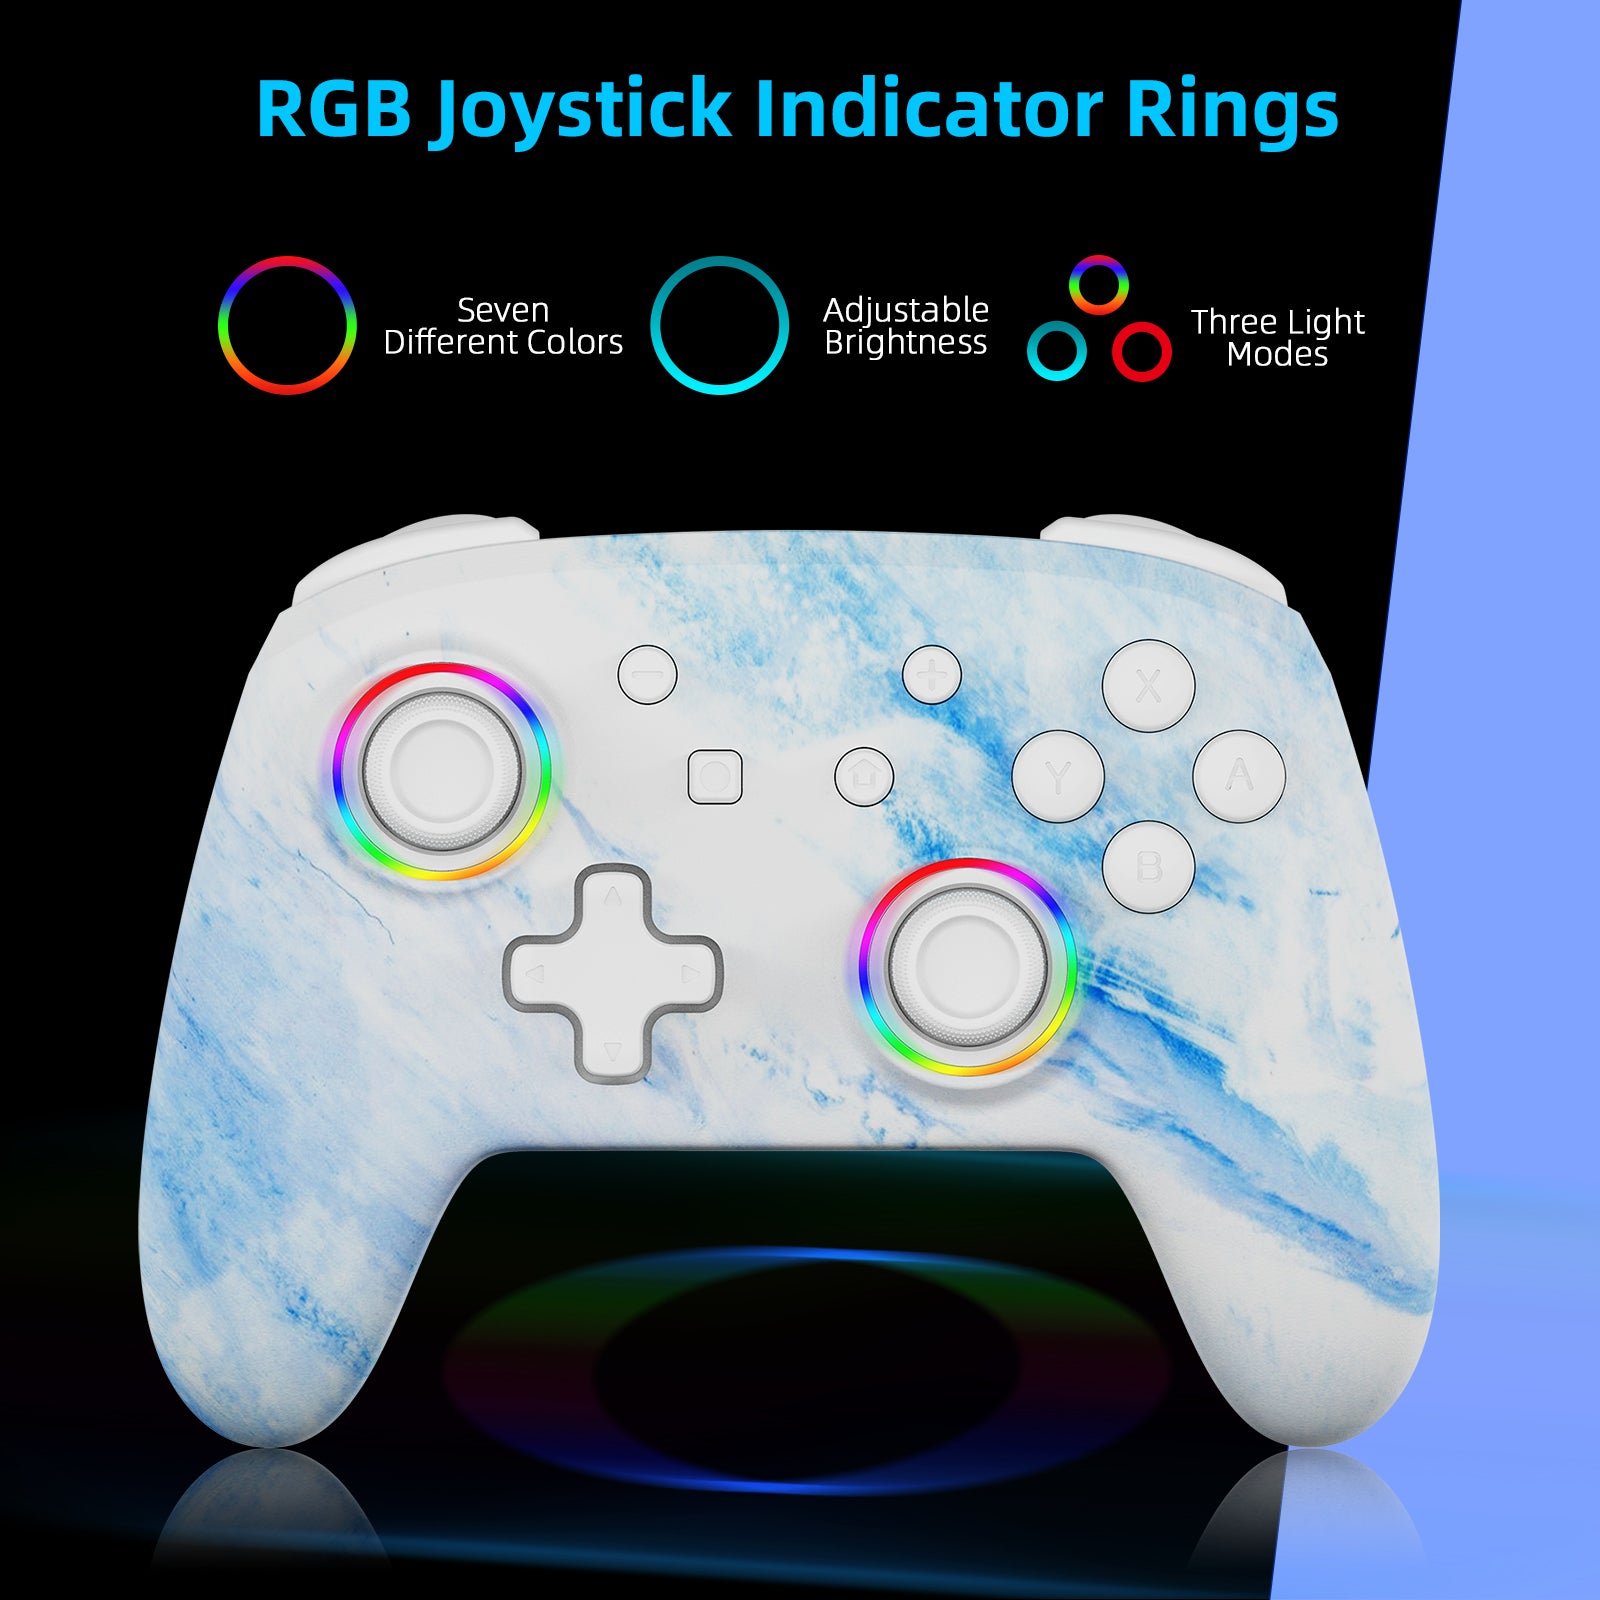 Customizable RGB ring light on the controller, with 7 colors and 3 lighting modes.